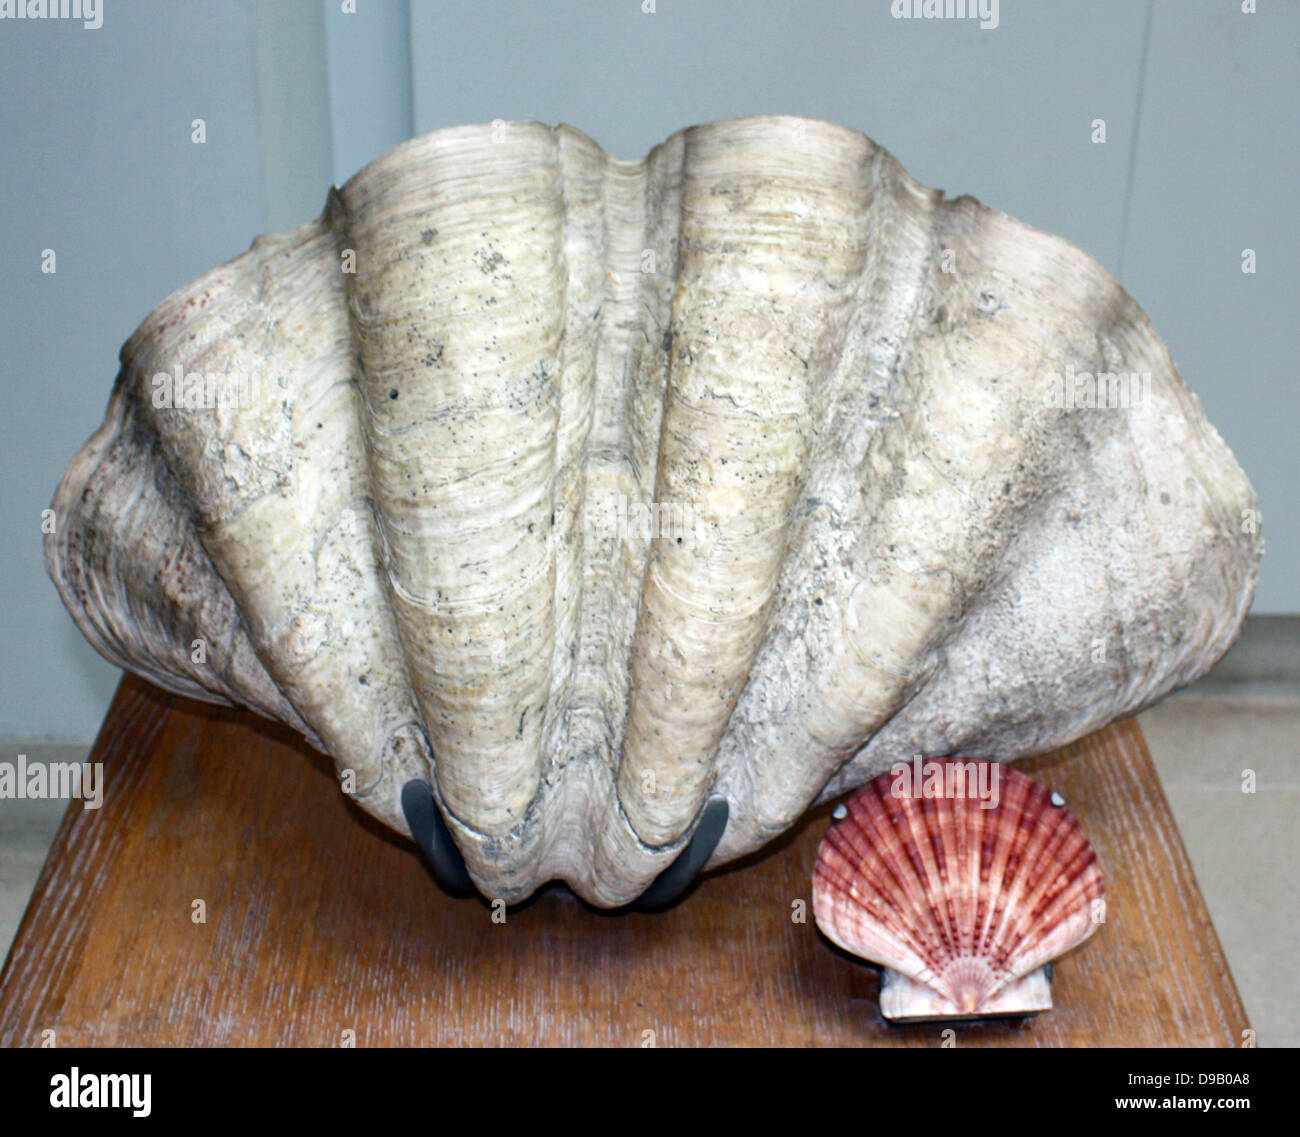 The Mollusc shell is typically an exoskeleton which encloses the animal in the Mollusca, which includes snails, clams, tusk shells and several other classes.  The shells in some mollusc show in bands e.g. seasons, tides, bad winters and pollution. Stock Photo